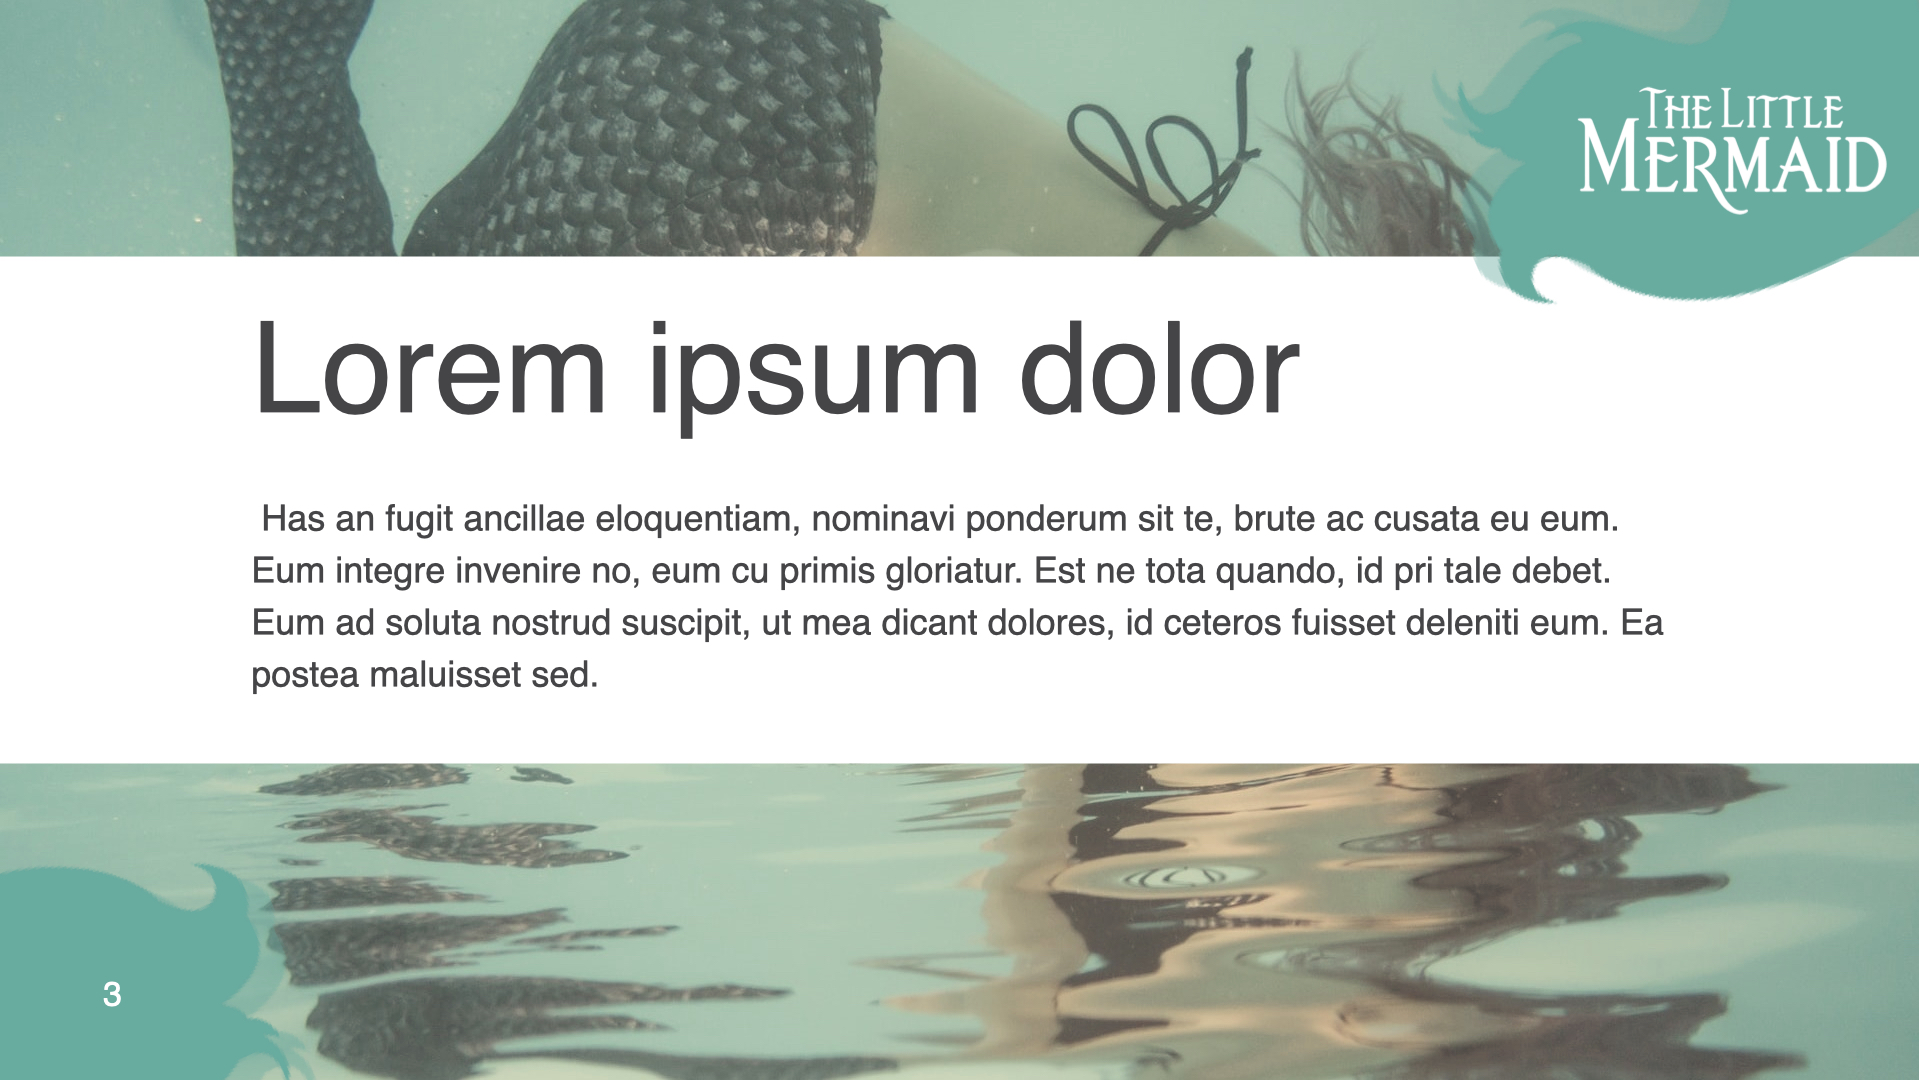 Nice mermaid slide with translucent background and text block.